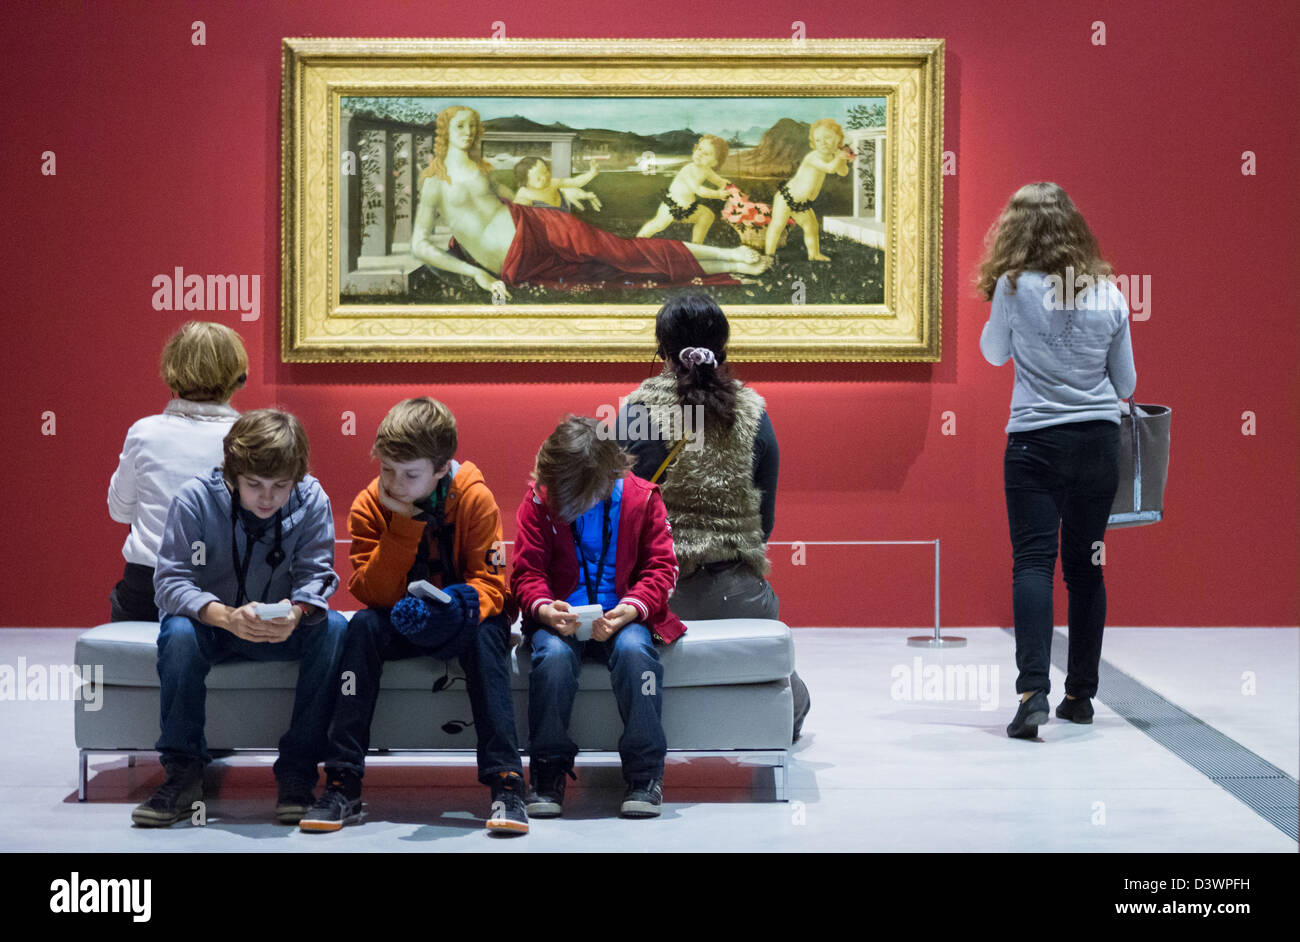 People view Sandro Boticelli's La Vénus at Louvre-Lens with bored disinterested children / teenagers Stock Photo